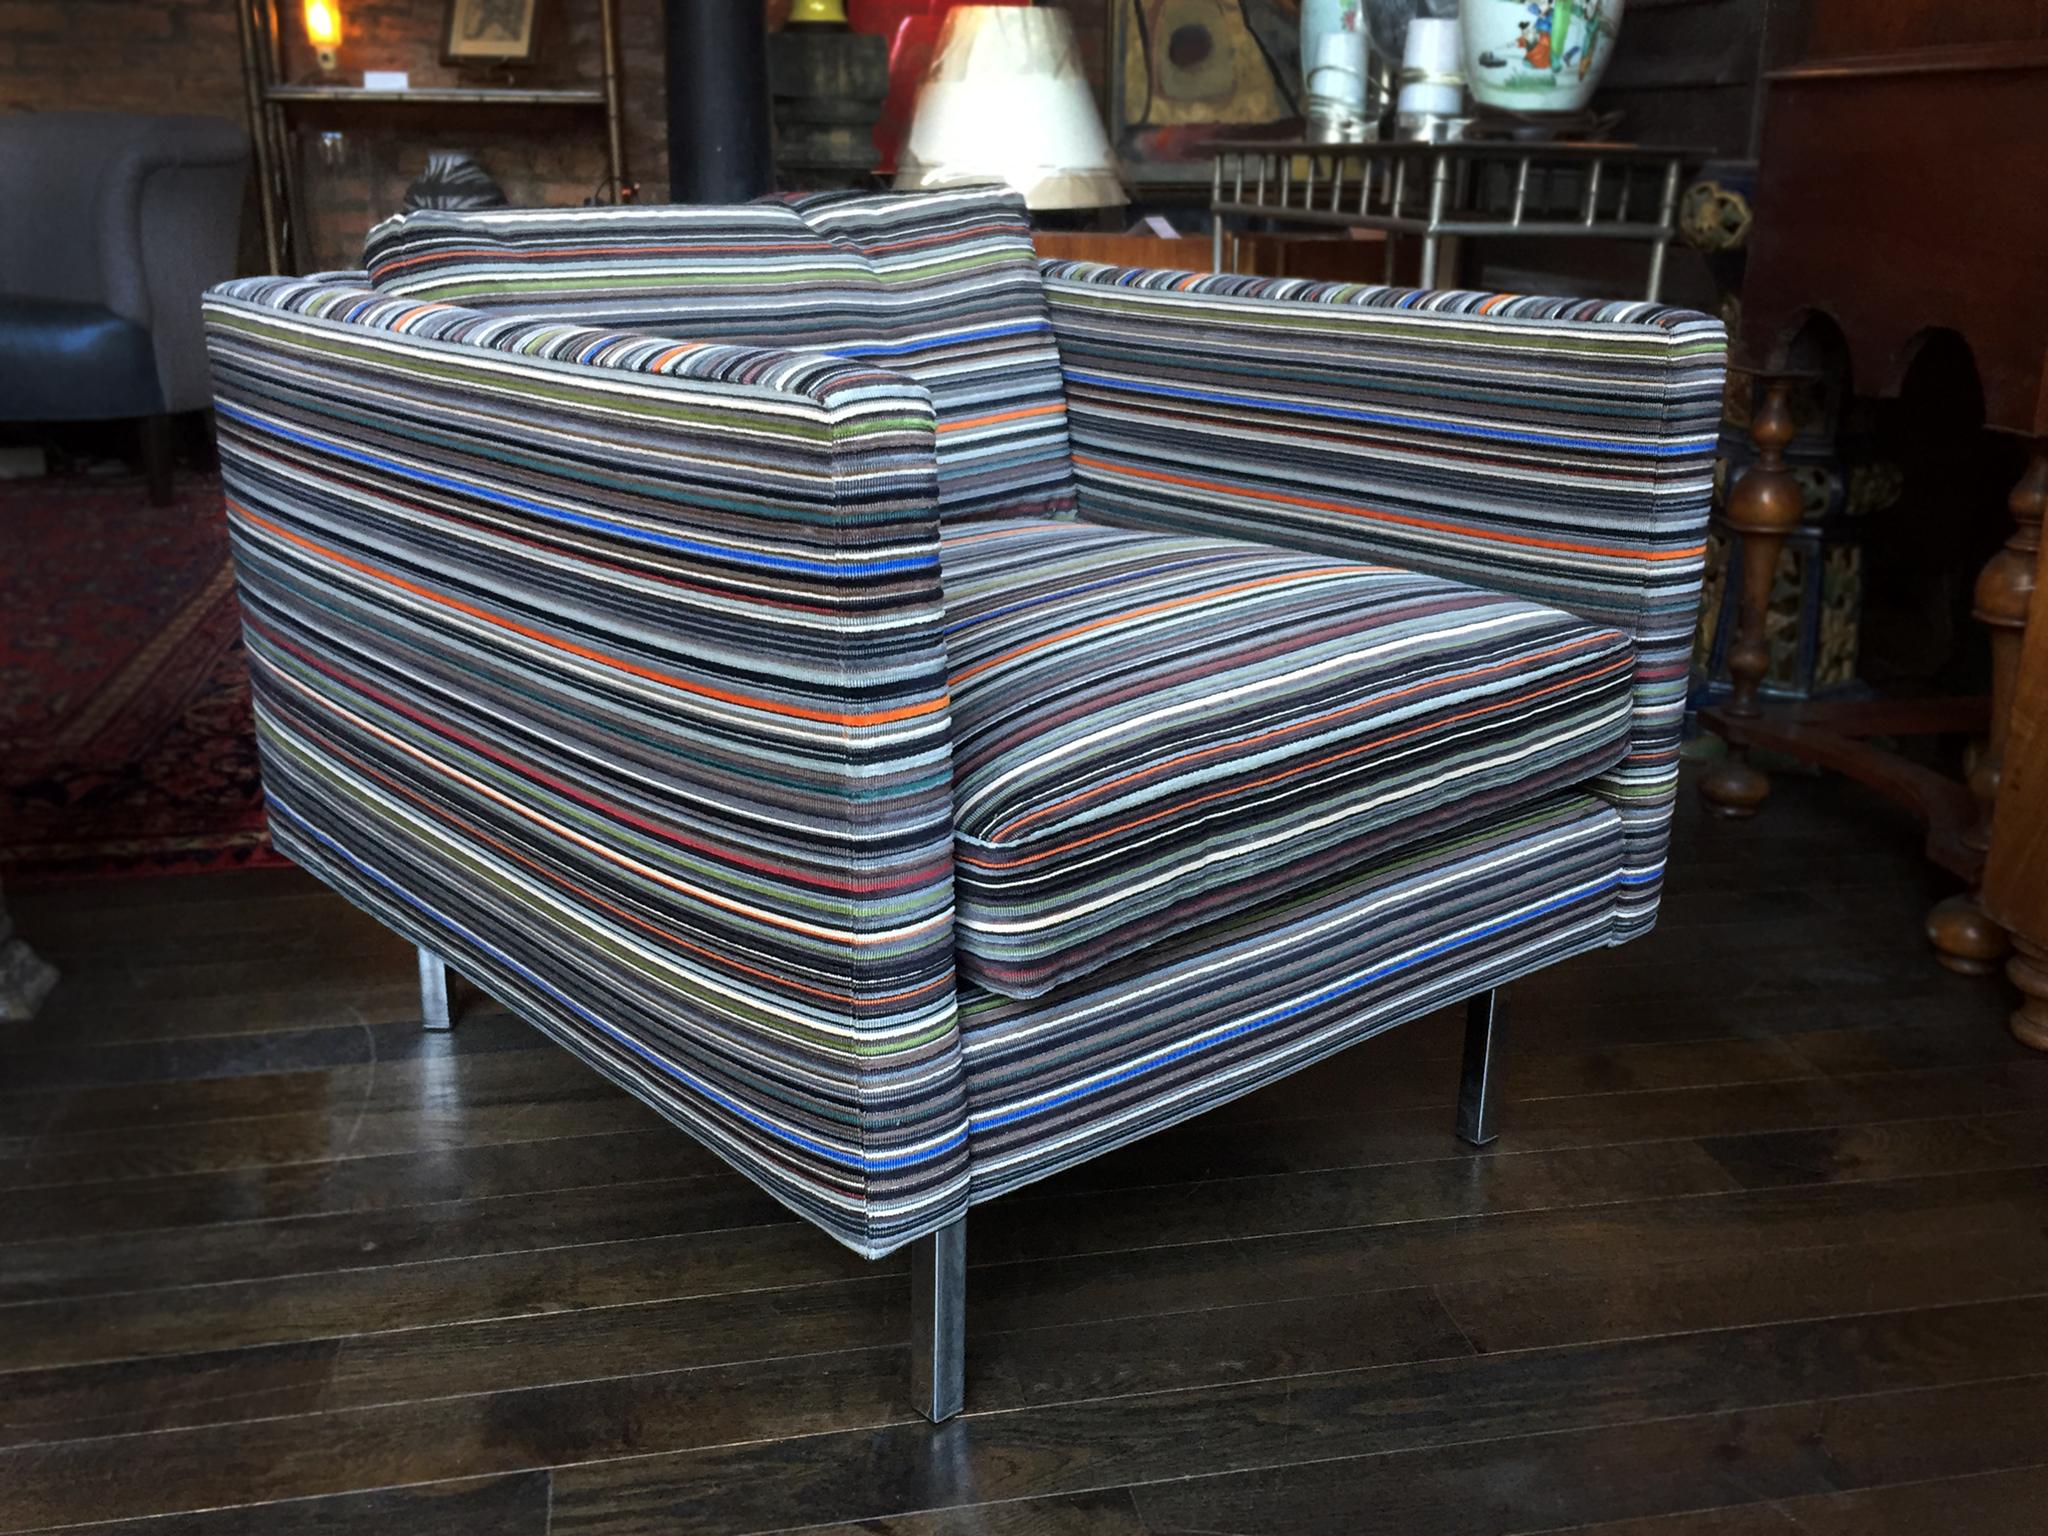 These exquisite Milo Baughman club chairs were manufactured by Thayer Coggin in the 1960s. They are newly reupholstered in a rich Paul Smith striped velvet from Maharam. The stunning textile adds movement and color to an otherwise Minimalist cubic